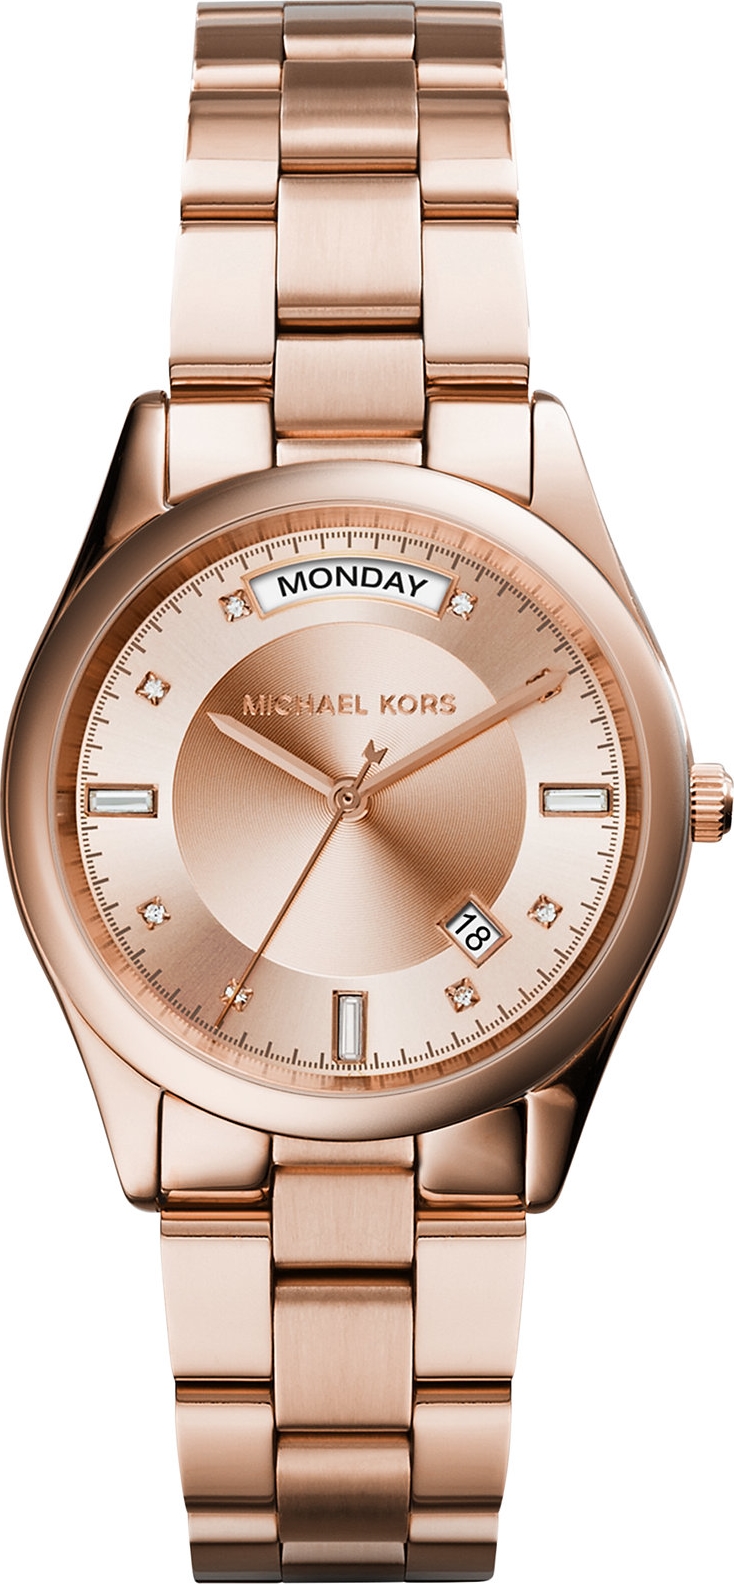 WatchOut  The gold standard  Michael Kors Colette Rose Watch Preowned   85 condition Retail price Rs 20000 Our price Rs 6000 Specs Model MK6336  34mm rose goldtone case Crystal markers